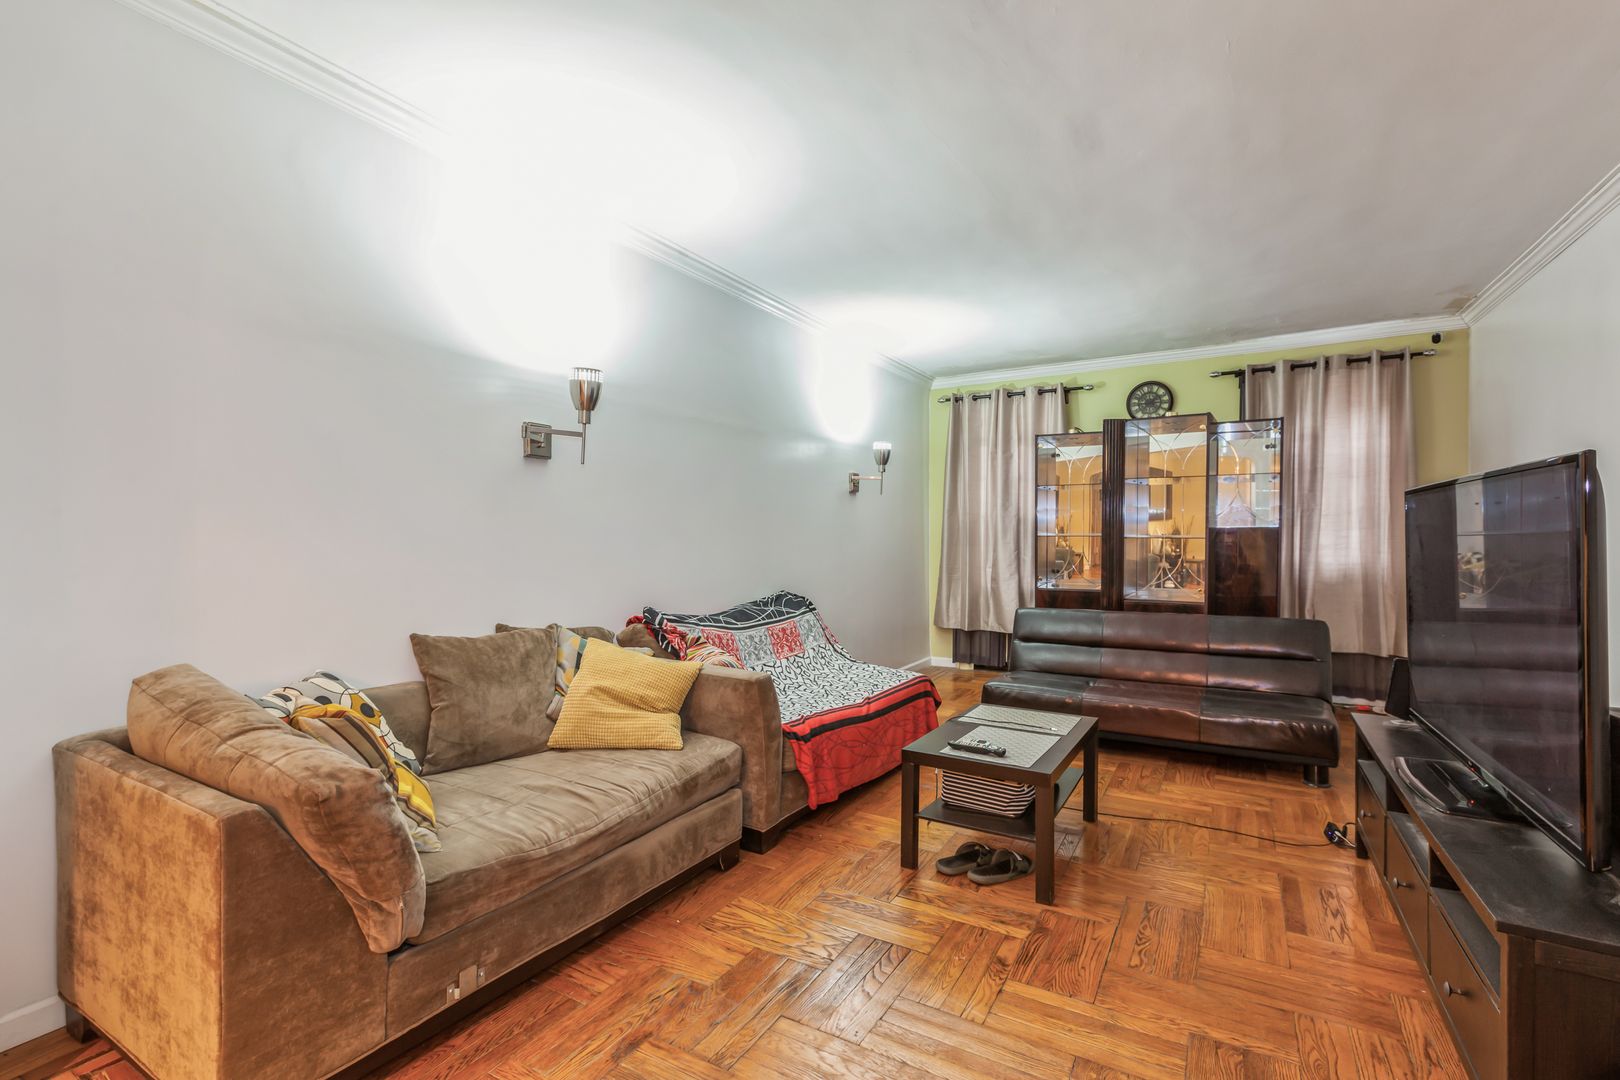 Rent-to-Own this Pelham Parkway 1-Bedroom Across the Street from the Bronx Zoo!